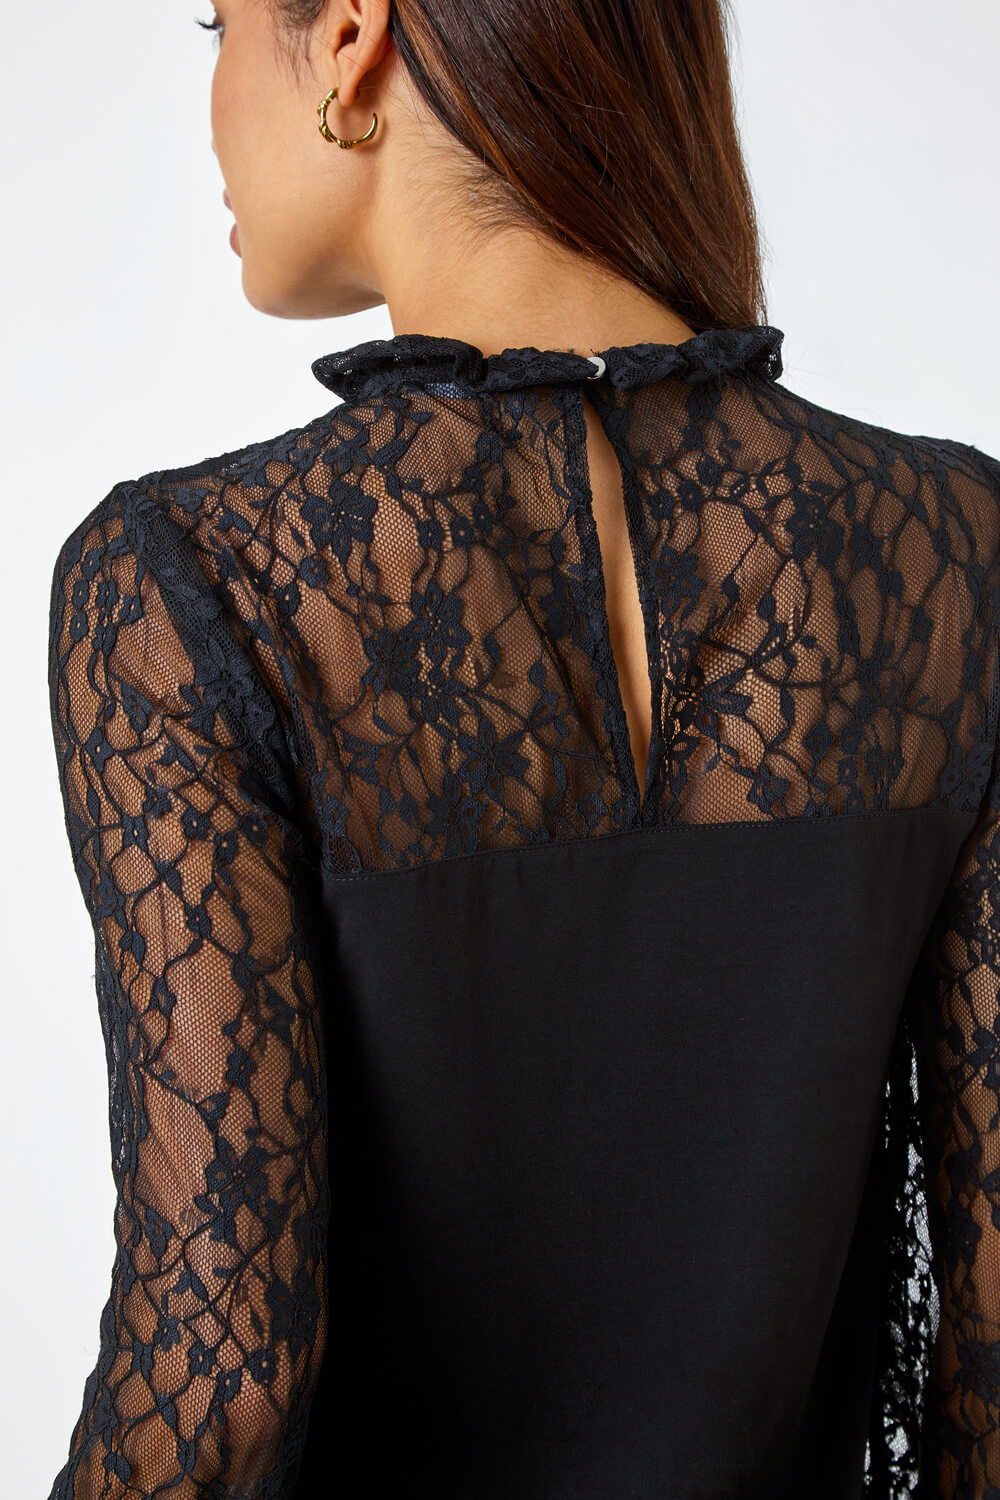 Black Lace Detail High Neck Stretch Top, Image 5 of 5